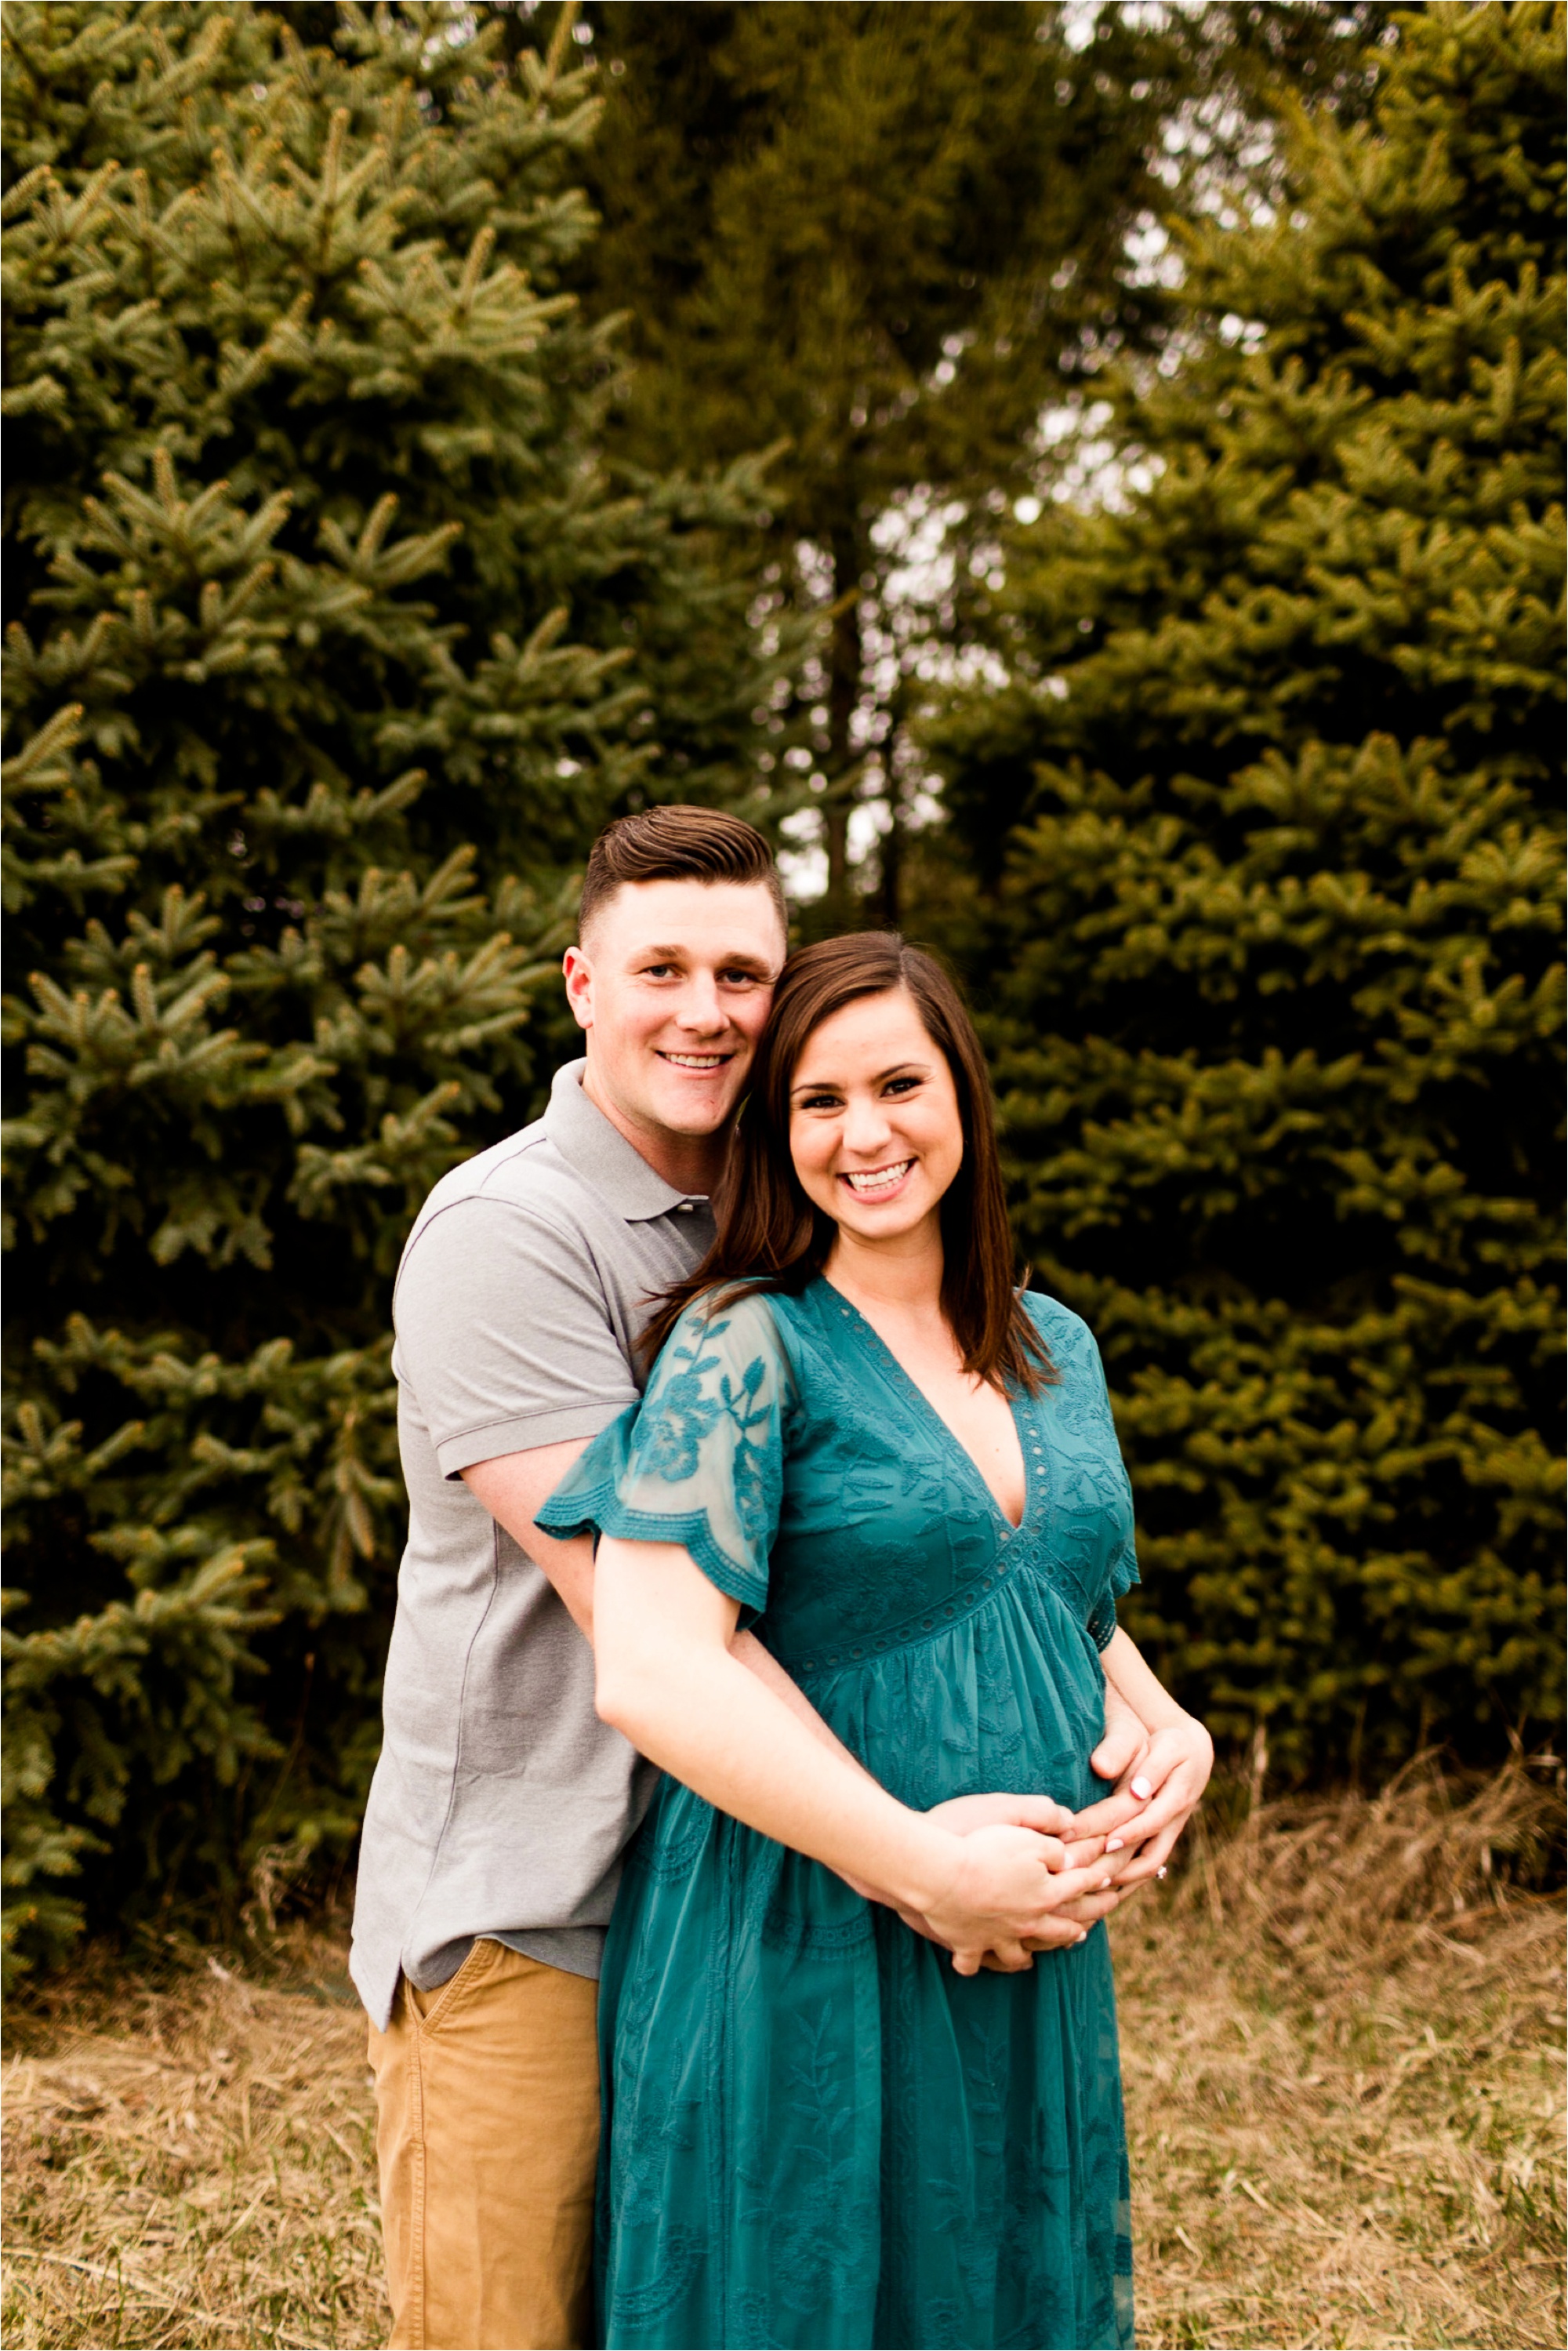 Caitlin and Luke Photography, Illinois Wedding Photographers, Chicago Wedding Photographers, Bloomington Normal Maternity Session_9445.jpg